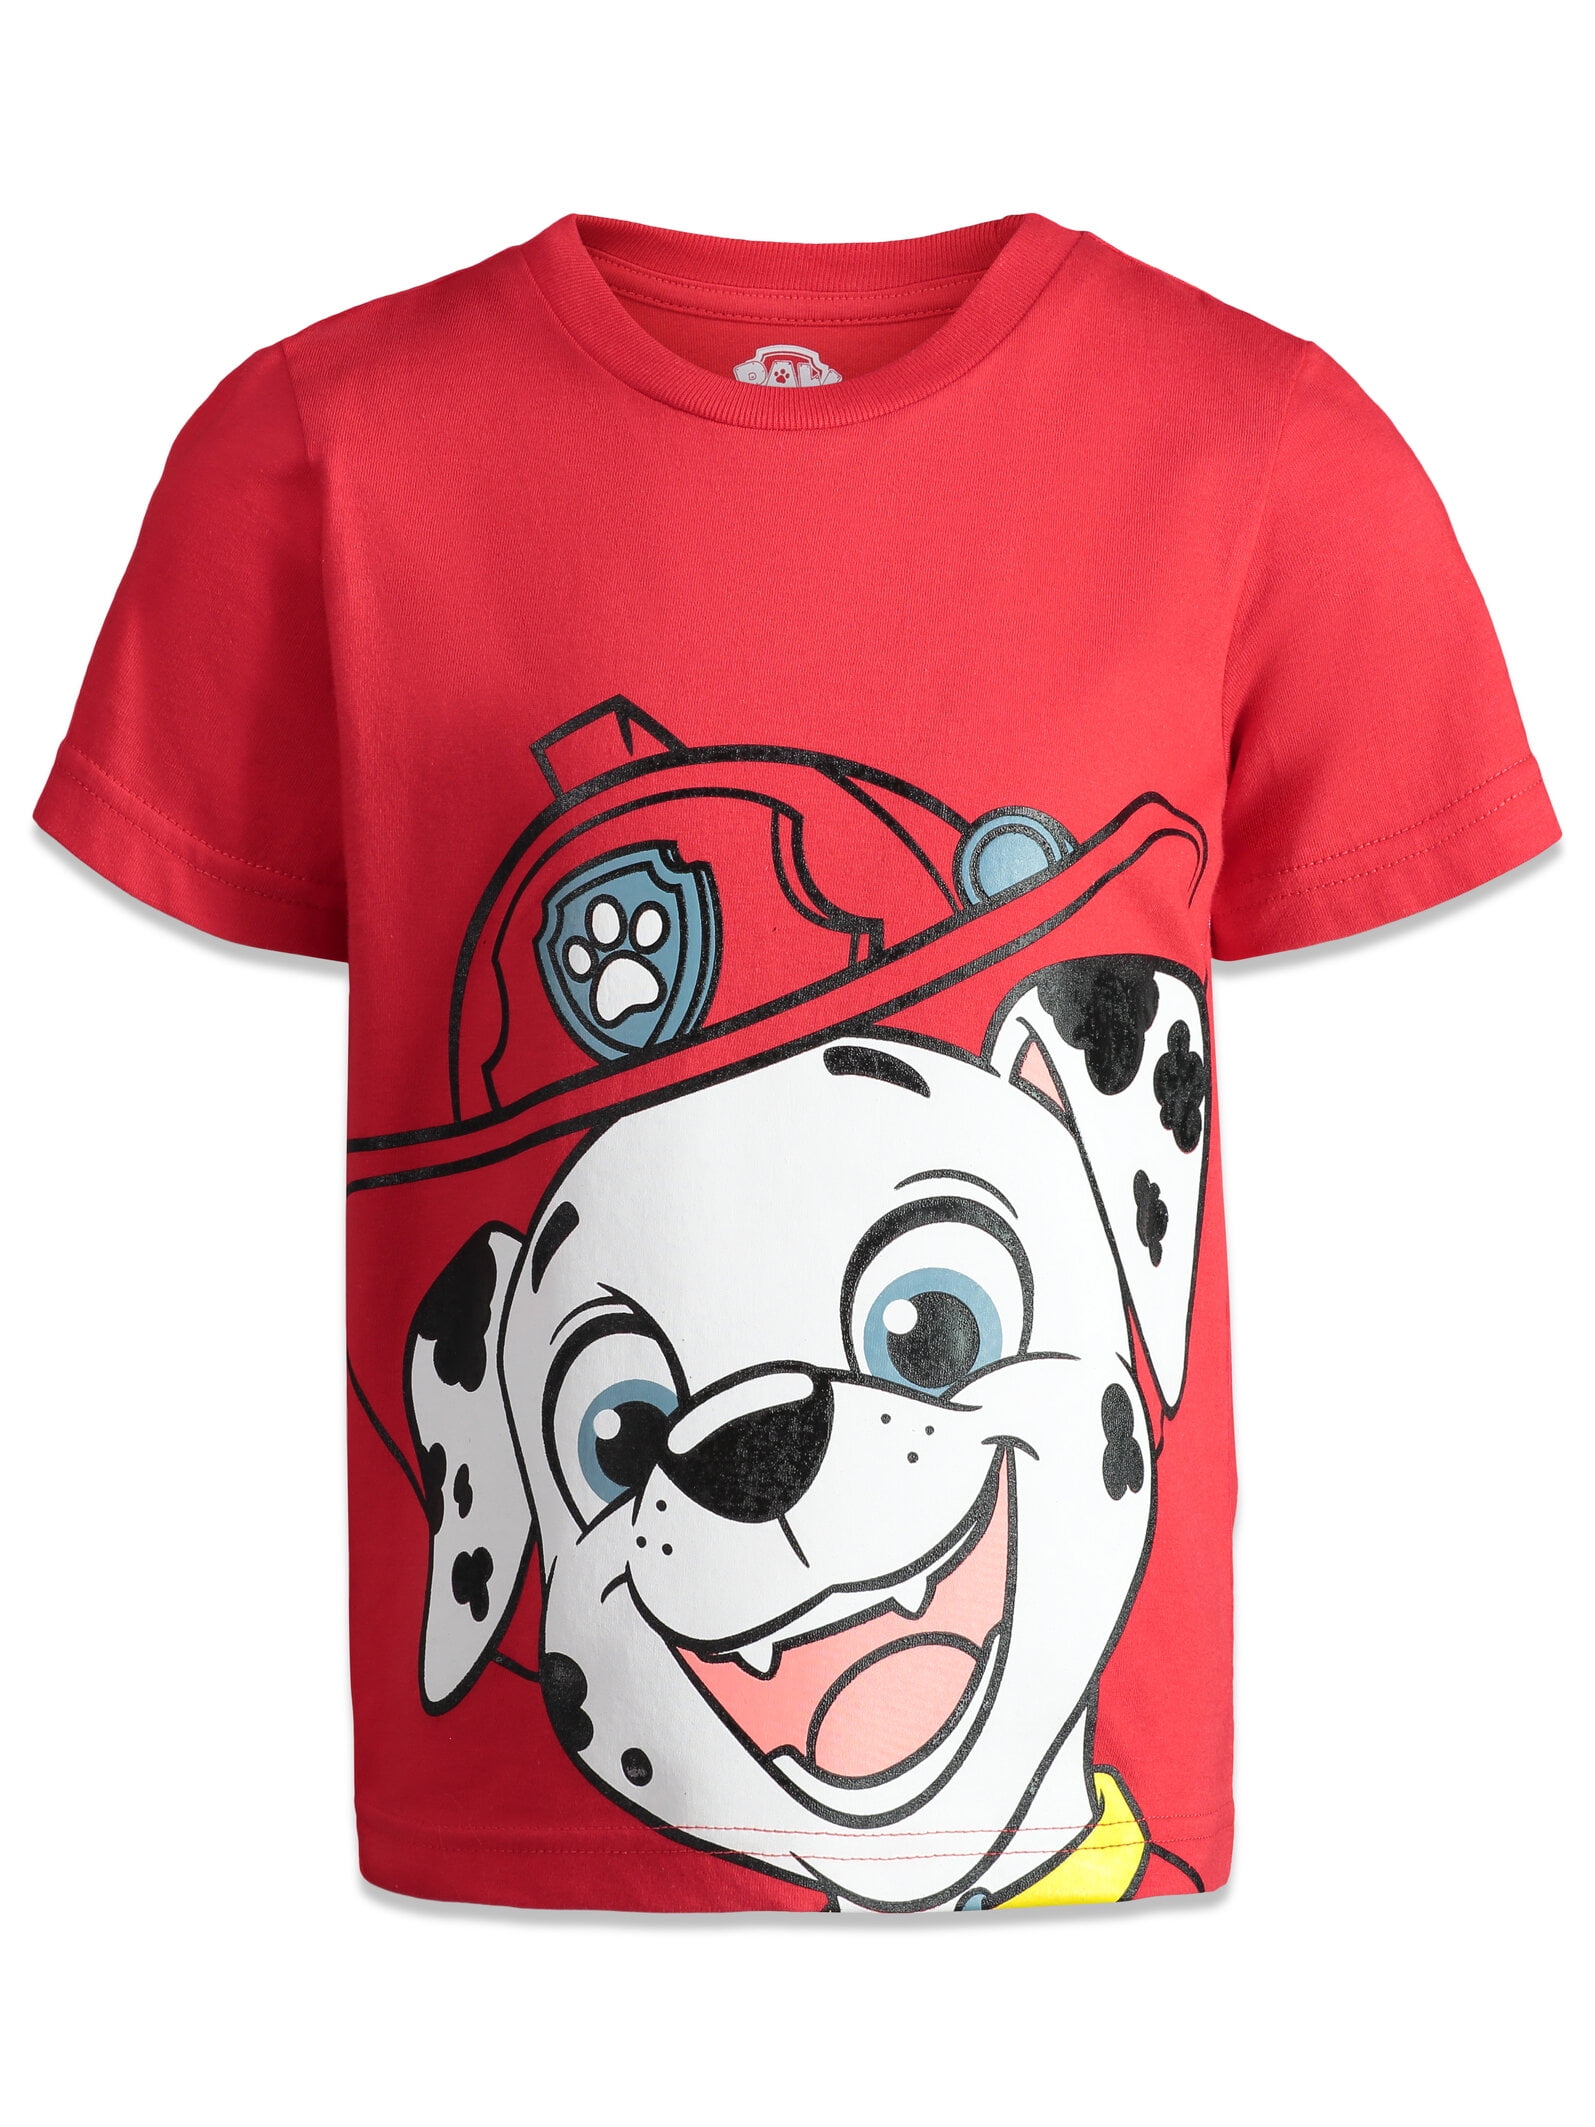 Paw Patrol Toddler Boys 4 Pack Graphic T-Shirt Chase Marshall Rubble & Rocky  3T